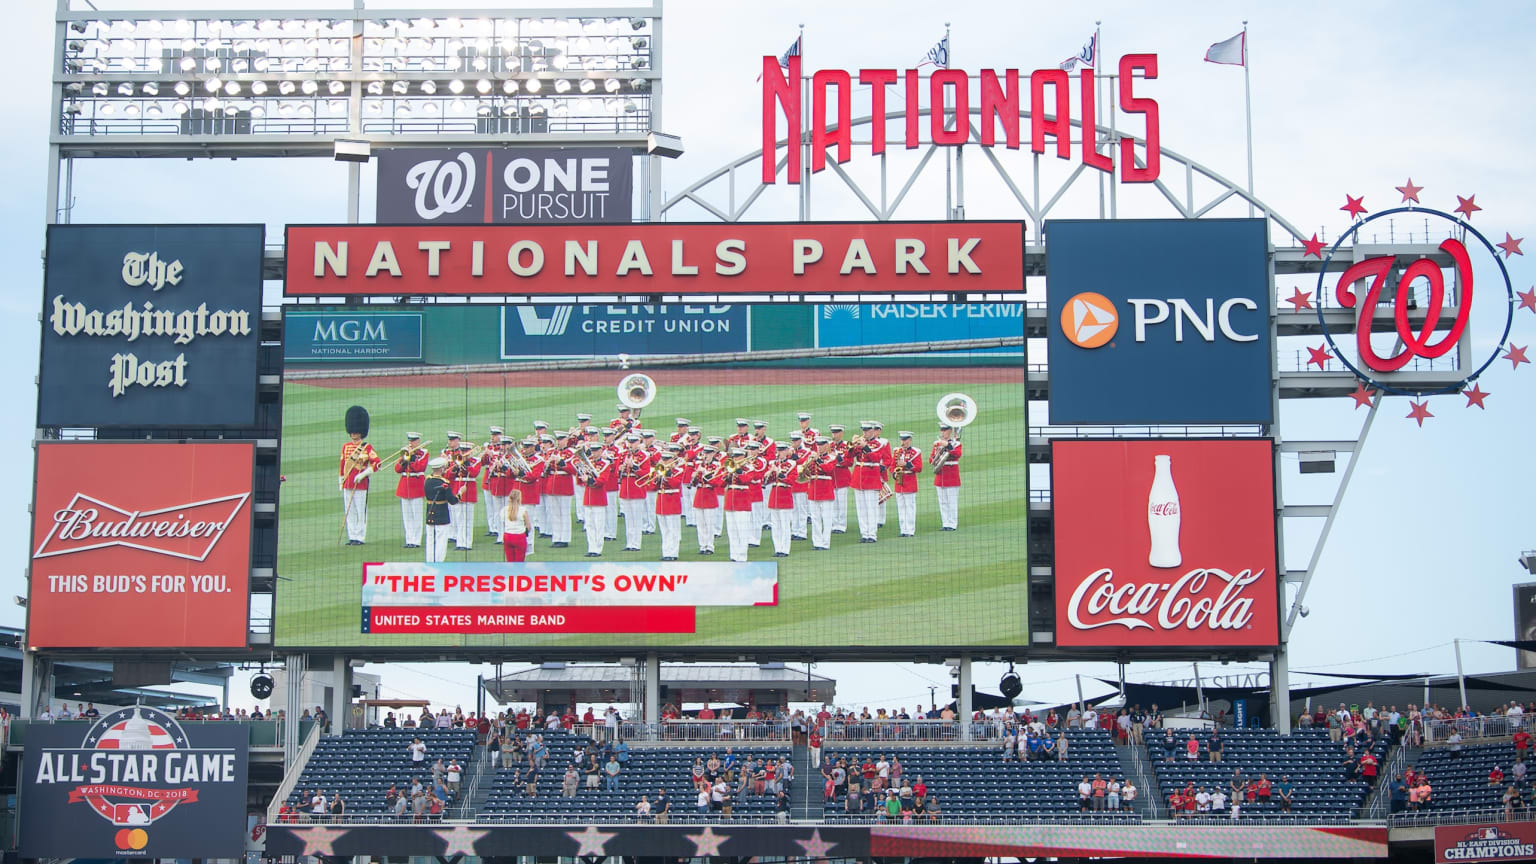 DVIDS - Images - Navy Day at Nationals Park [Image 1 of 12]